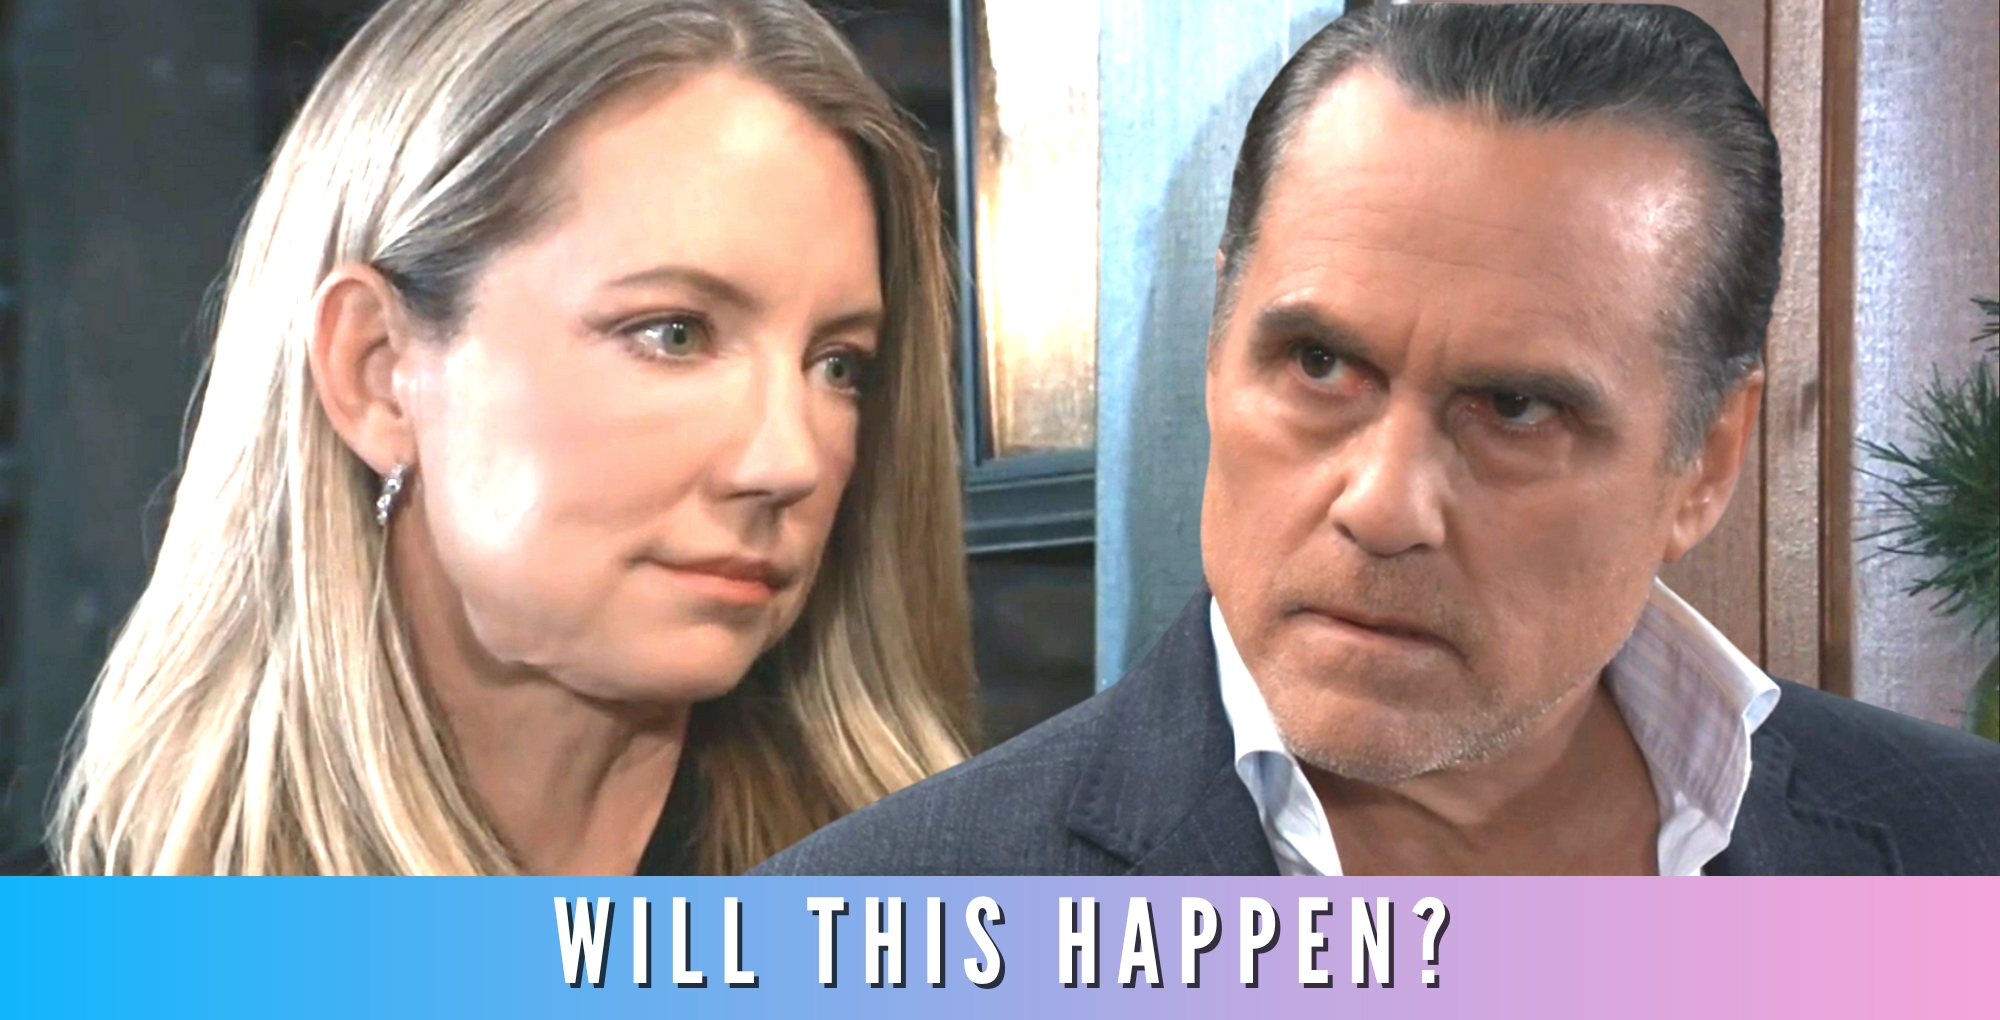 nina reeves upset sonny corinthos on general hospital, with "will it happen" banner.